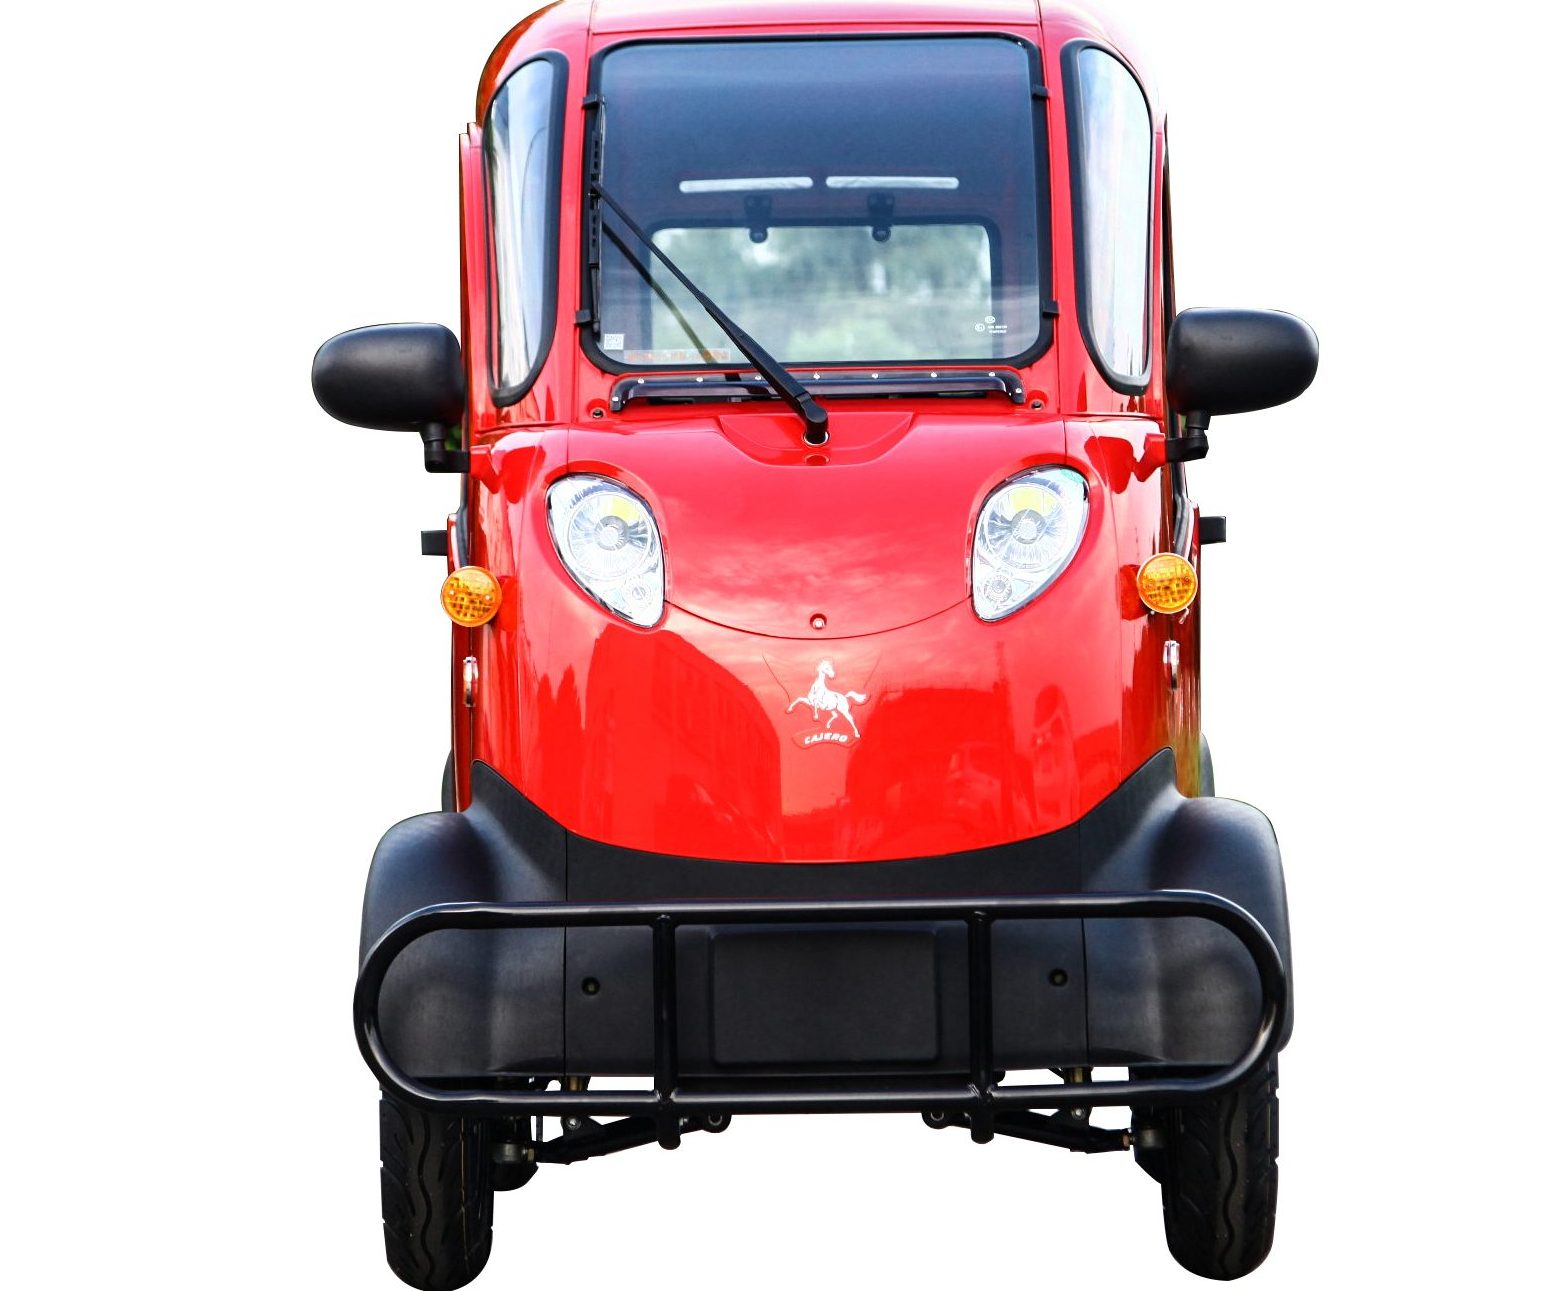 Awesomely Weird Alibaba Electric Vehicle of the Week this ridiculous